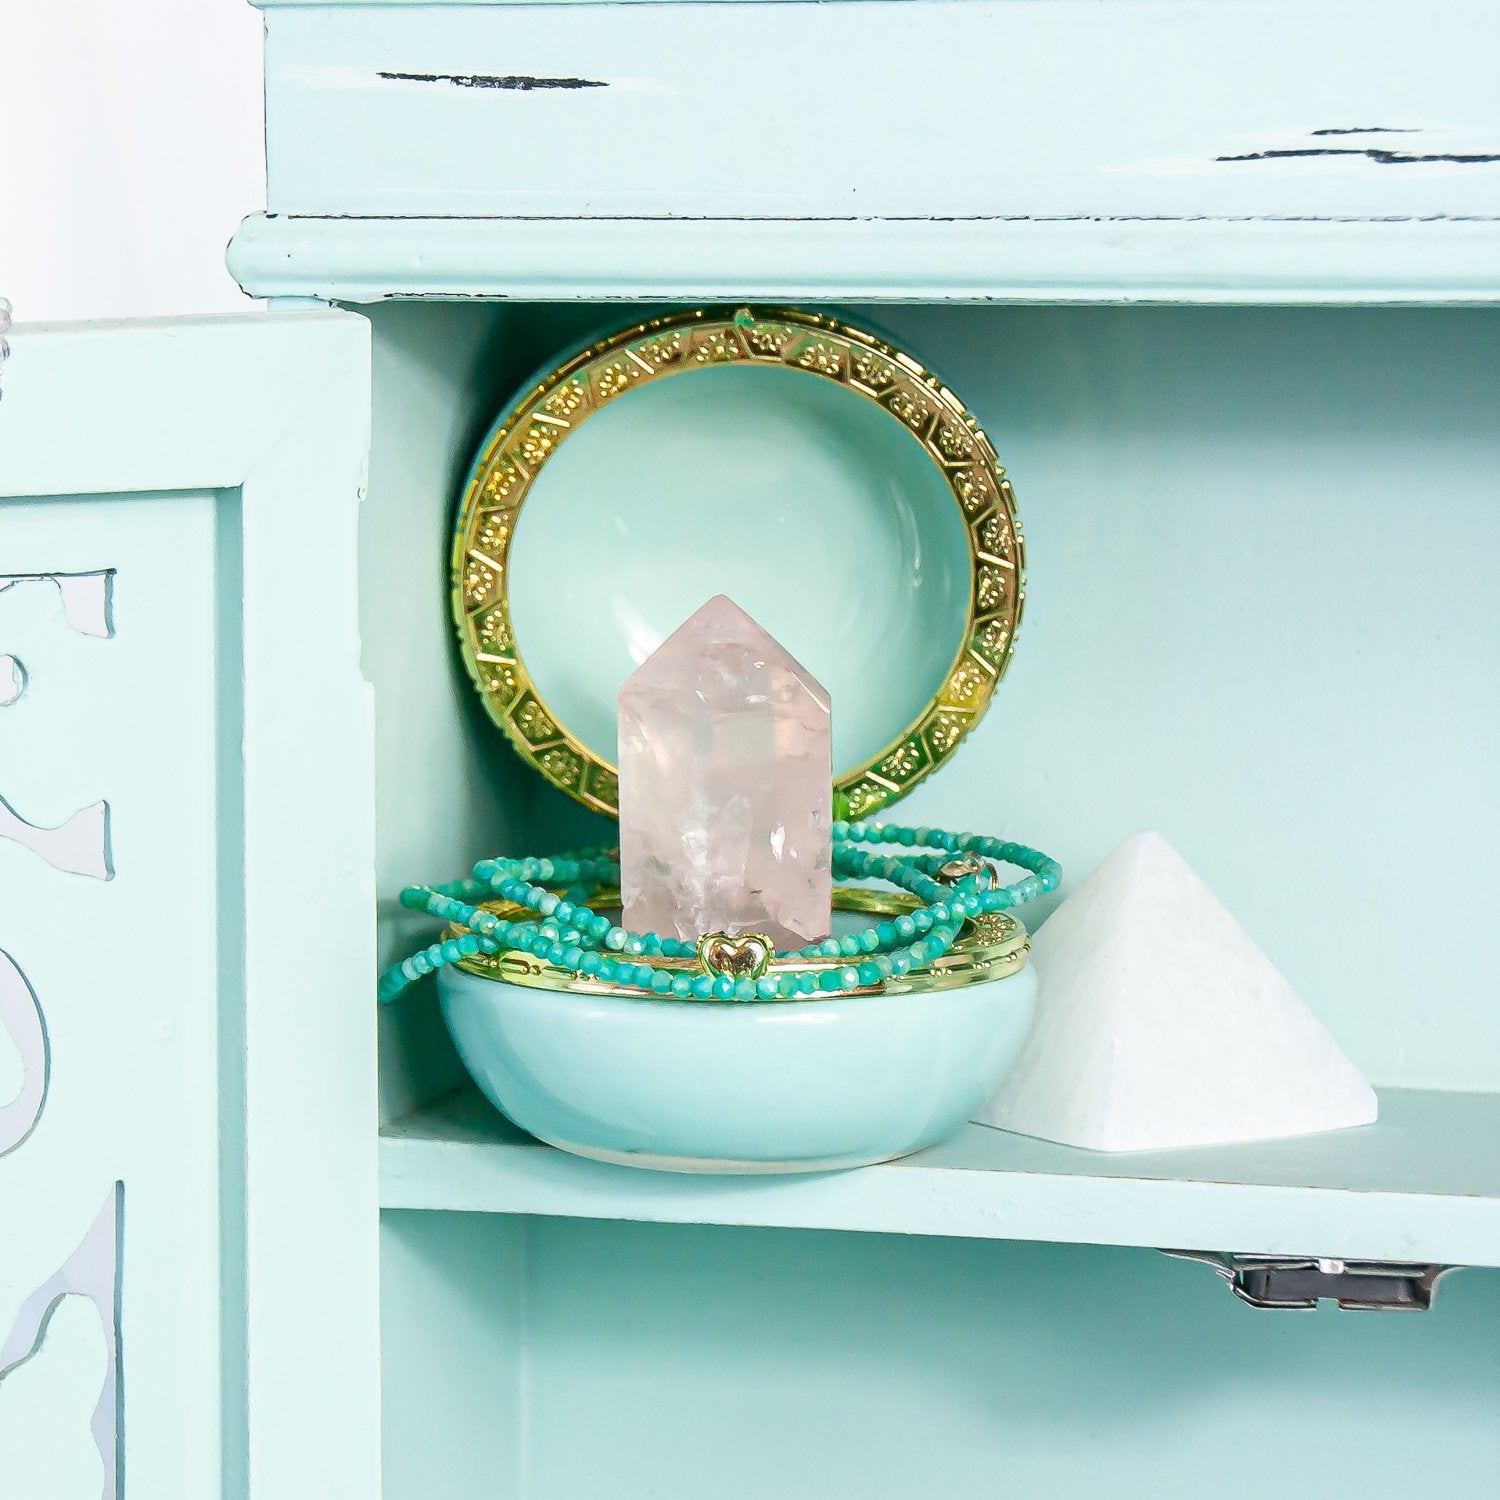 2mm amazonite faceted crystal necklace set around rose quartz point inside jewelry box. to the right of it sits a selenite crystal pyramid. all inside cabinet. close-up.